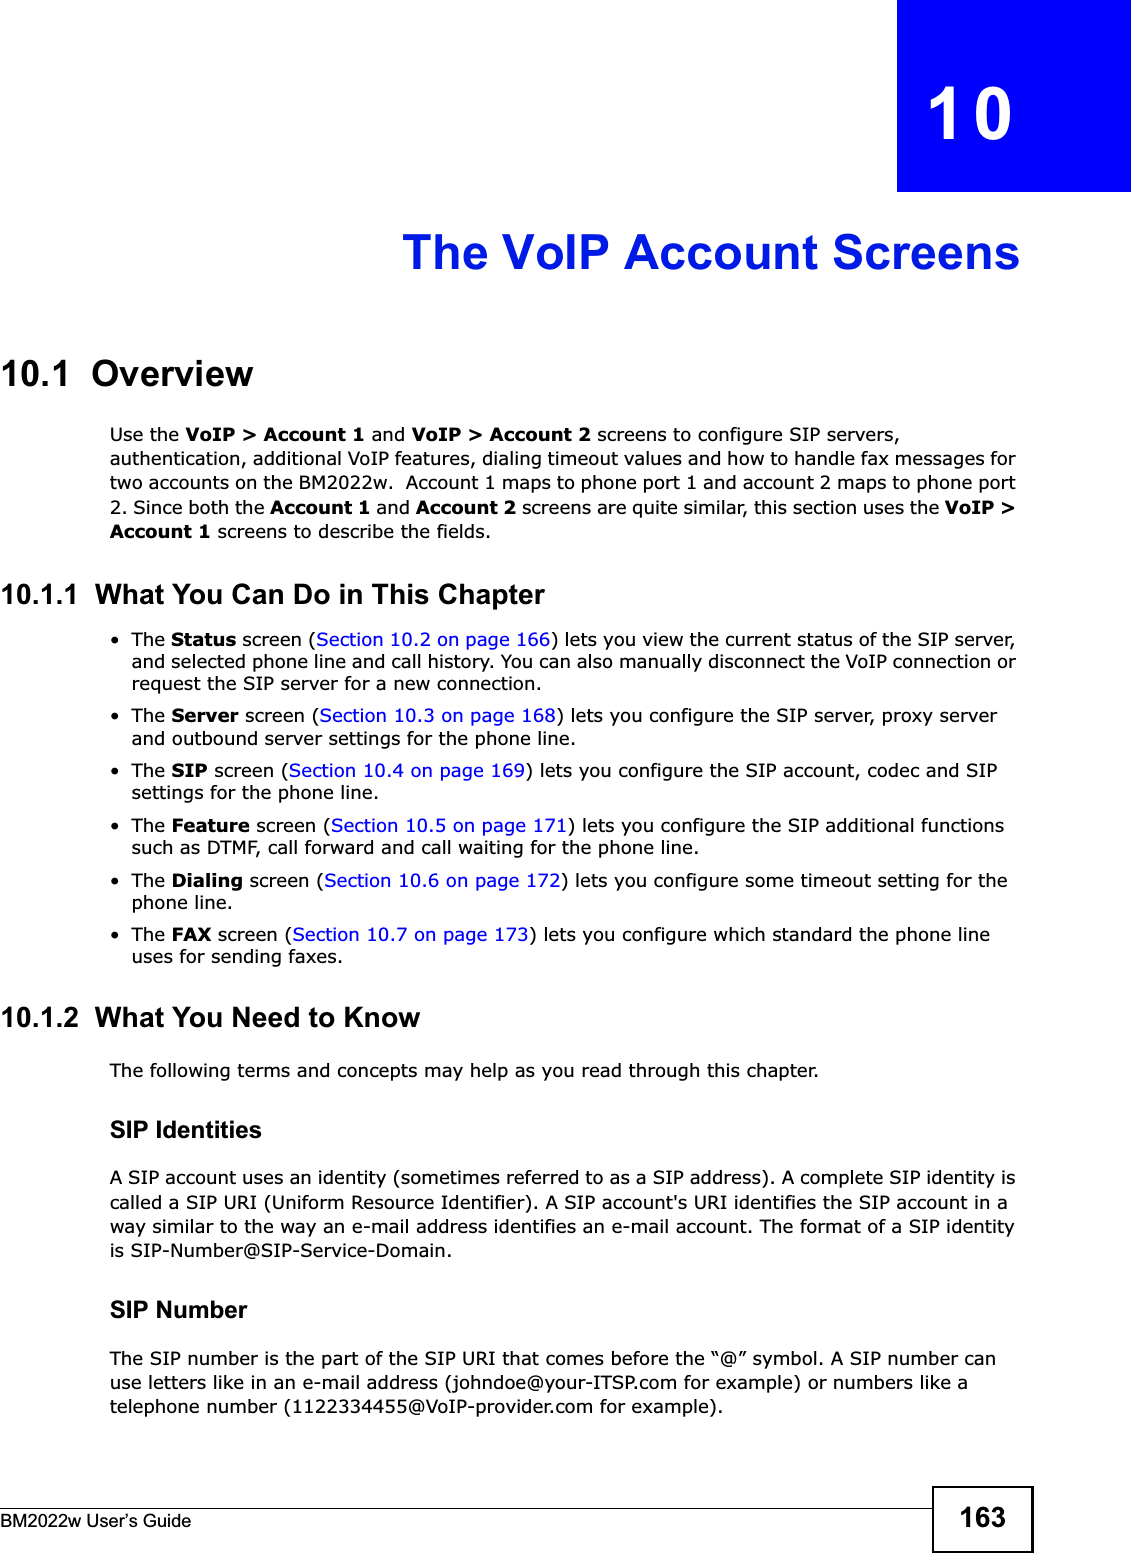 BM2022w User’s Guide 163CHAPTER   10The VoIP Account Screens10.1  OverviewUse the VoIP &gt; Account 1 and VoIP &gt; Account 2 screens to configure SIP servers, authentication, additional VoIP features, dialing timeout values and how to handle fax messages for two accounts on the BM2022w.  Account 1 maps to phone port 1 and account 2 maps to phone port 2. Since both the Account 1 and Account 2 screens are quite similar, this section uses the VoIP &gt; Account 1 screens to describe the fields.10.1.1  What You Can Do in This Chapter•The Status screen (Section 10.2 on page 166) lets you view the current status of the SIP server, and selected phone line and call history. You can also manually disconnect the VoIP connection or request the SIP server for a new connection.•The Server screen (Section 10.3 on page 168) lets you configure the SIP server, proxy server and outbound server settings for the phone line.•The SIP screen (Section 10.4 on page 169) lets you configure the SIP account, codec and SIP settings for the phone line.•The Feature screen (Section 10.5 on page 171) lets you configure the SIP additional functions such as DTMF, call forward and call waiting for the phone line.•The Dialing screen (Section 10.6 on page 172) lets you configure some timeout setting for the phone line.•The FAX screen (Section 10.7 on page 173) lets you configure which standard the phone line uses for sending faxes.10.1.2  What You Need to KnowThe following terms and concepts may help as you read through this chapter.SIP IdentitiesA SIP account uses an identity (sometimes referred to as a SIP address). A complete SIP identity is called a SIP URI (Uniform Resource Identifier). A SIP account&apos;s URI identifies the SIP account in a way similar to the way an e-mail address identifies an e-mail account. The format of a SIP identity is SIP-Number@SIP-Service-Domain.SIP NumberThe SIP number is the part of the SIP URI that comes before the “@” symbol. A SIP number can use letters like in an e-mail address (johndoe@your-ITSP.com for example) or numbers like a telephone number (1122334455@VoIP-provider.com for example).